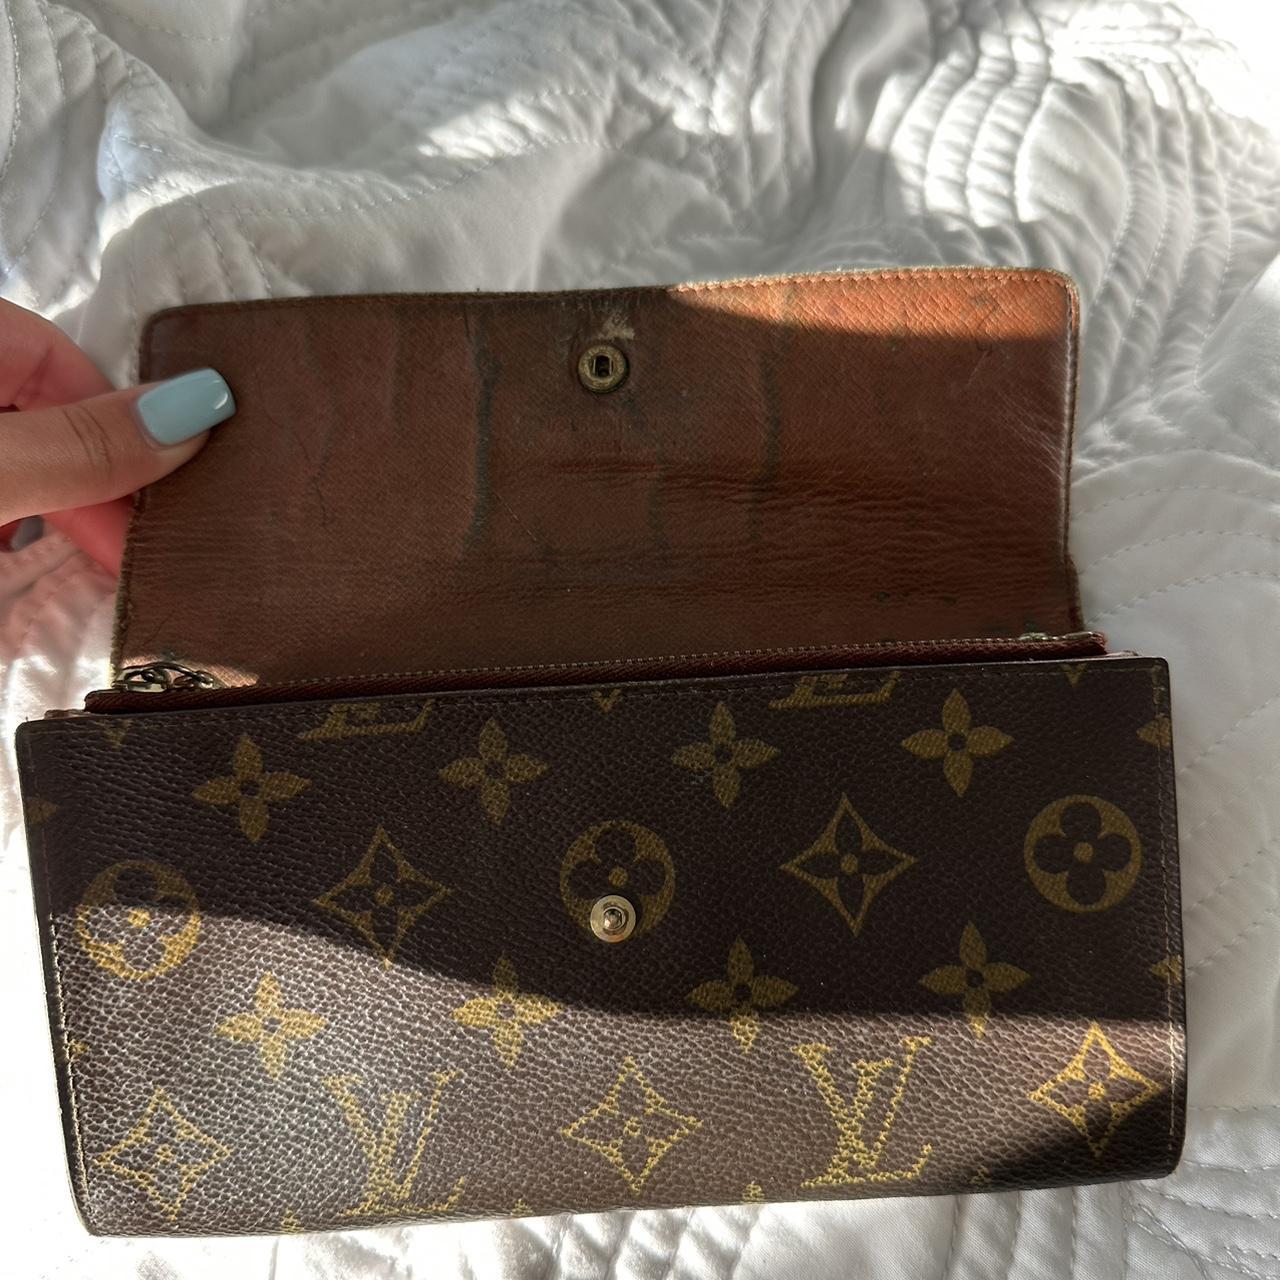 AUTHENTIC LV Wallet , Very worn but still works